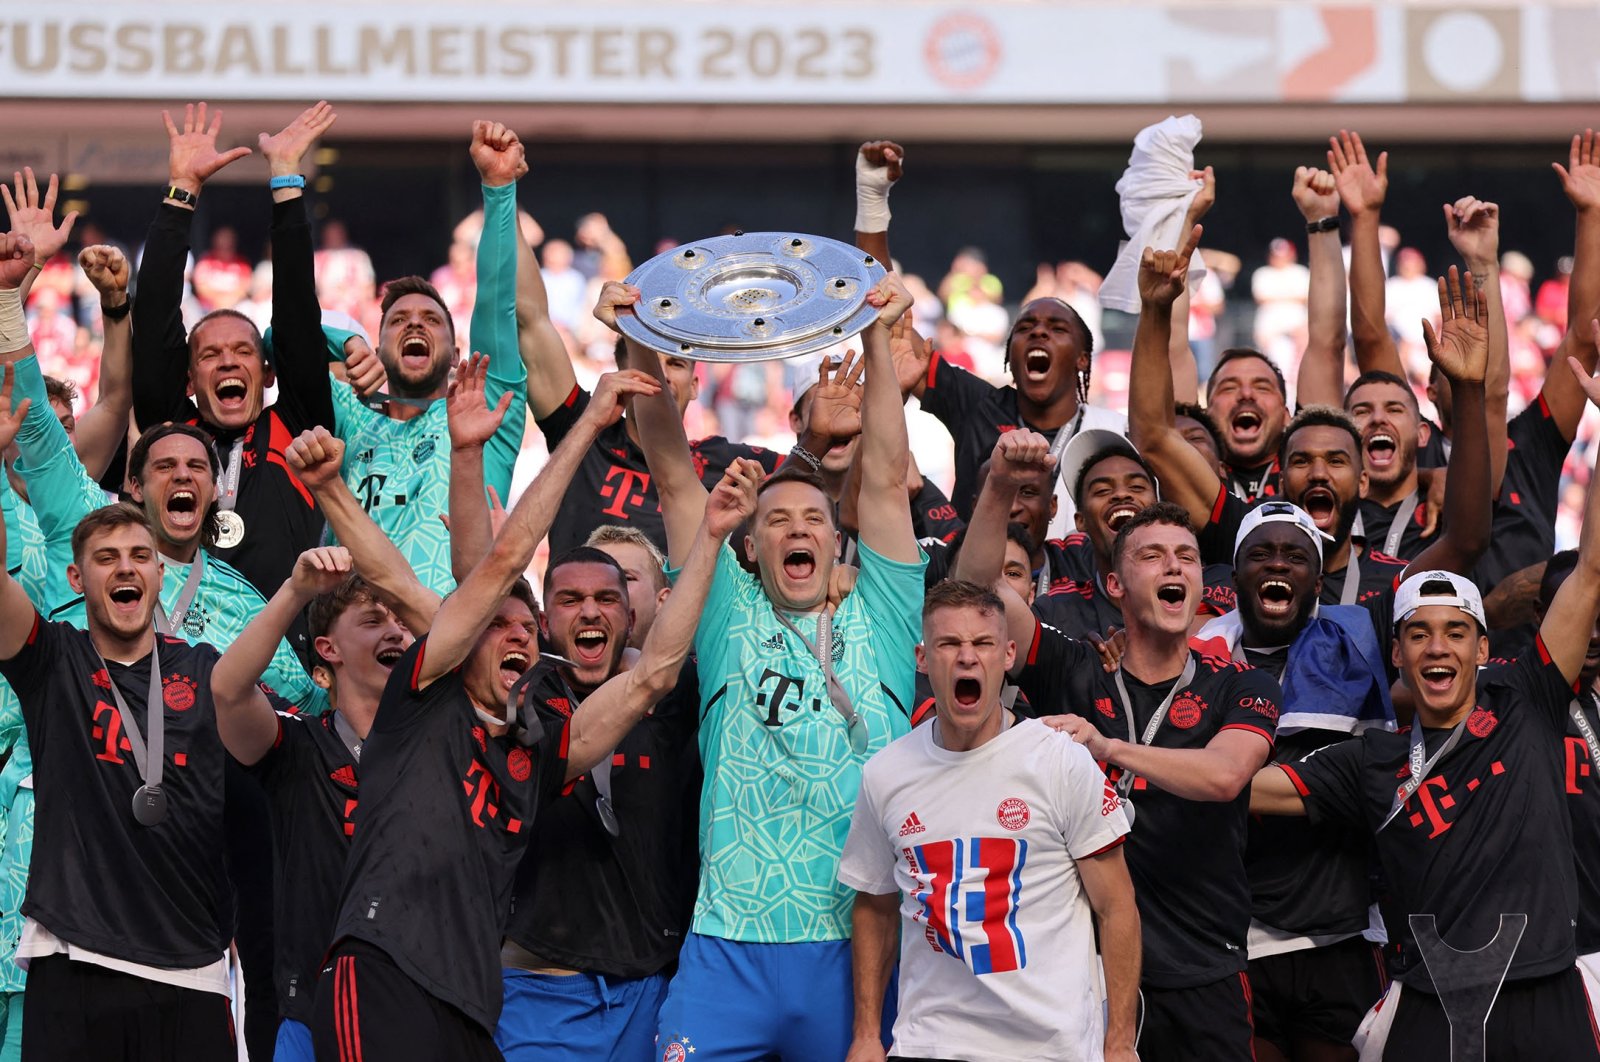 Bayern Munich players celebrate with the trophy after winning the Bundesliga, at RheinEnergieStadion, in Cologne, Germany, May 27, 2023. (Reuters Photo)